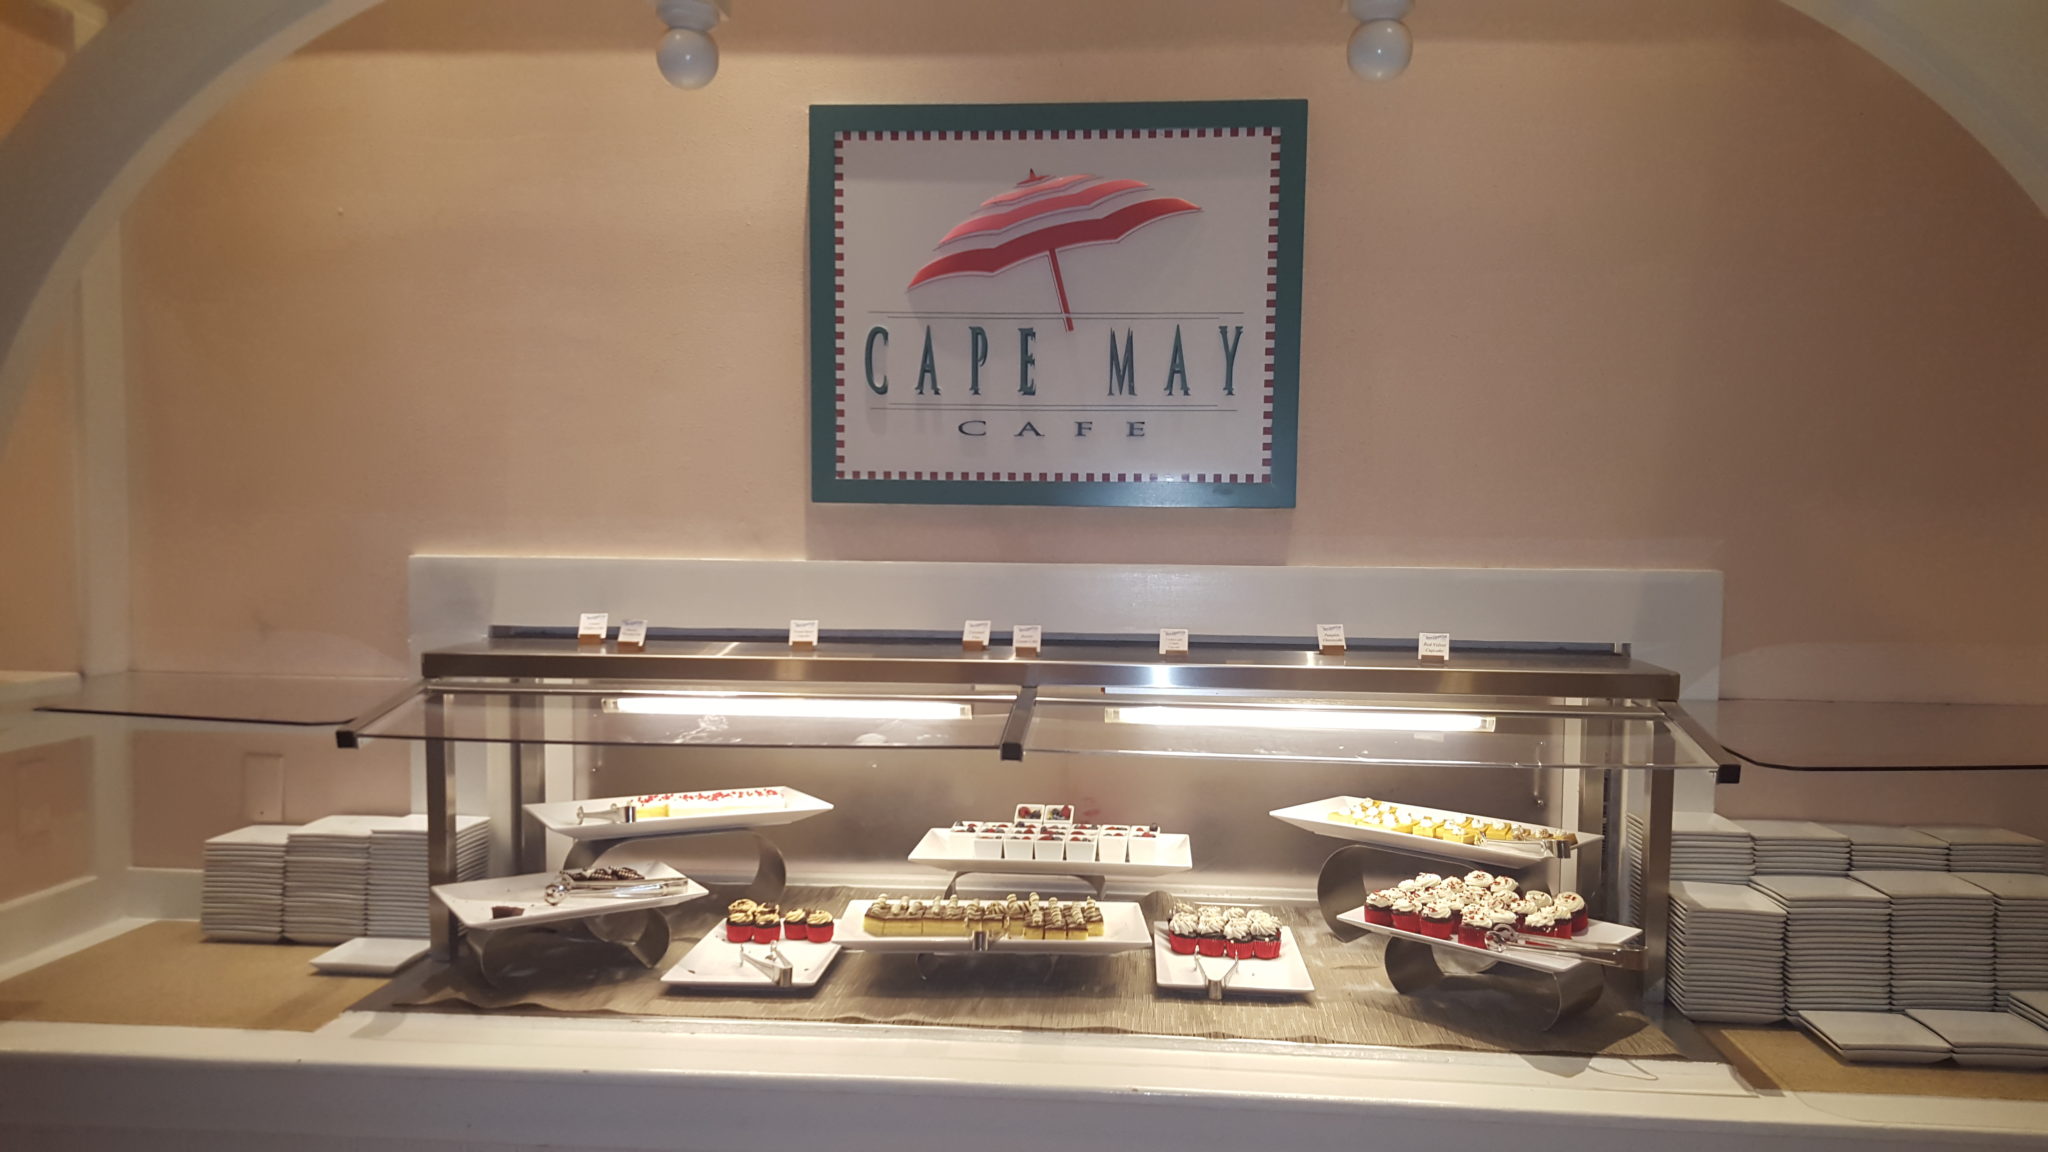 Cape May Cafe “ClamBake” Dinner Review